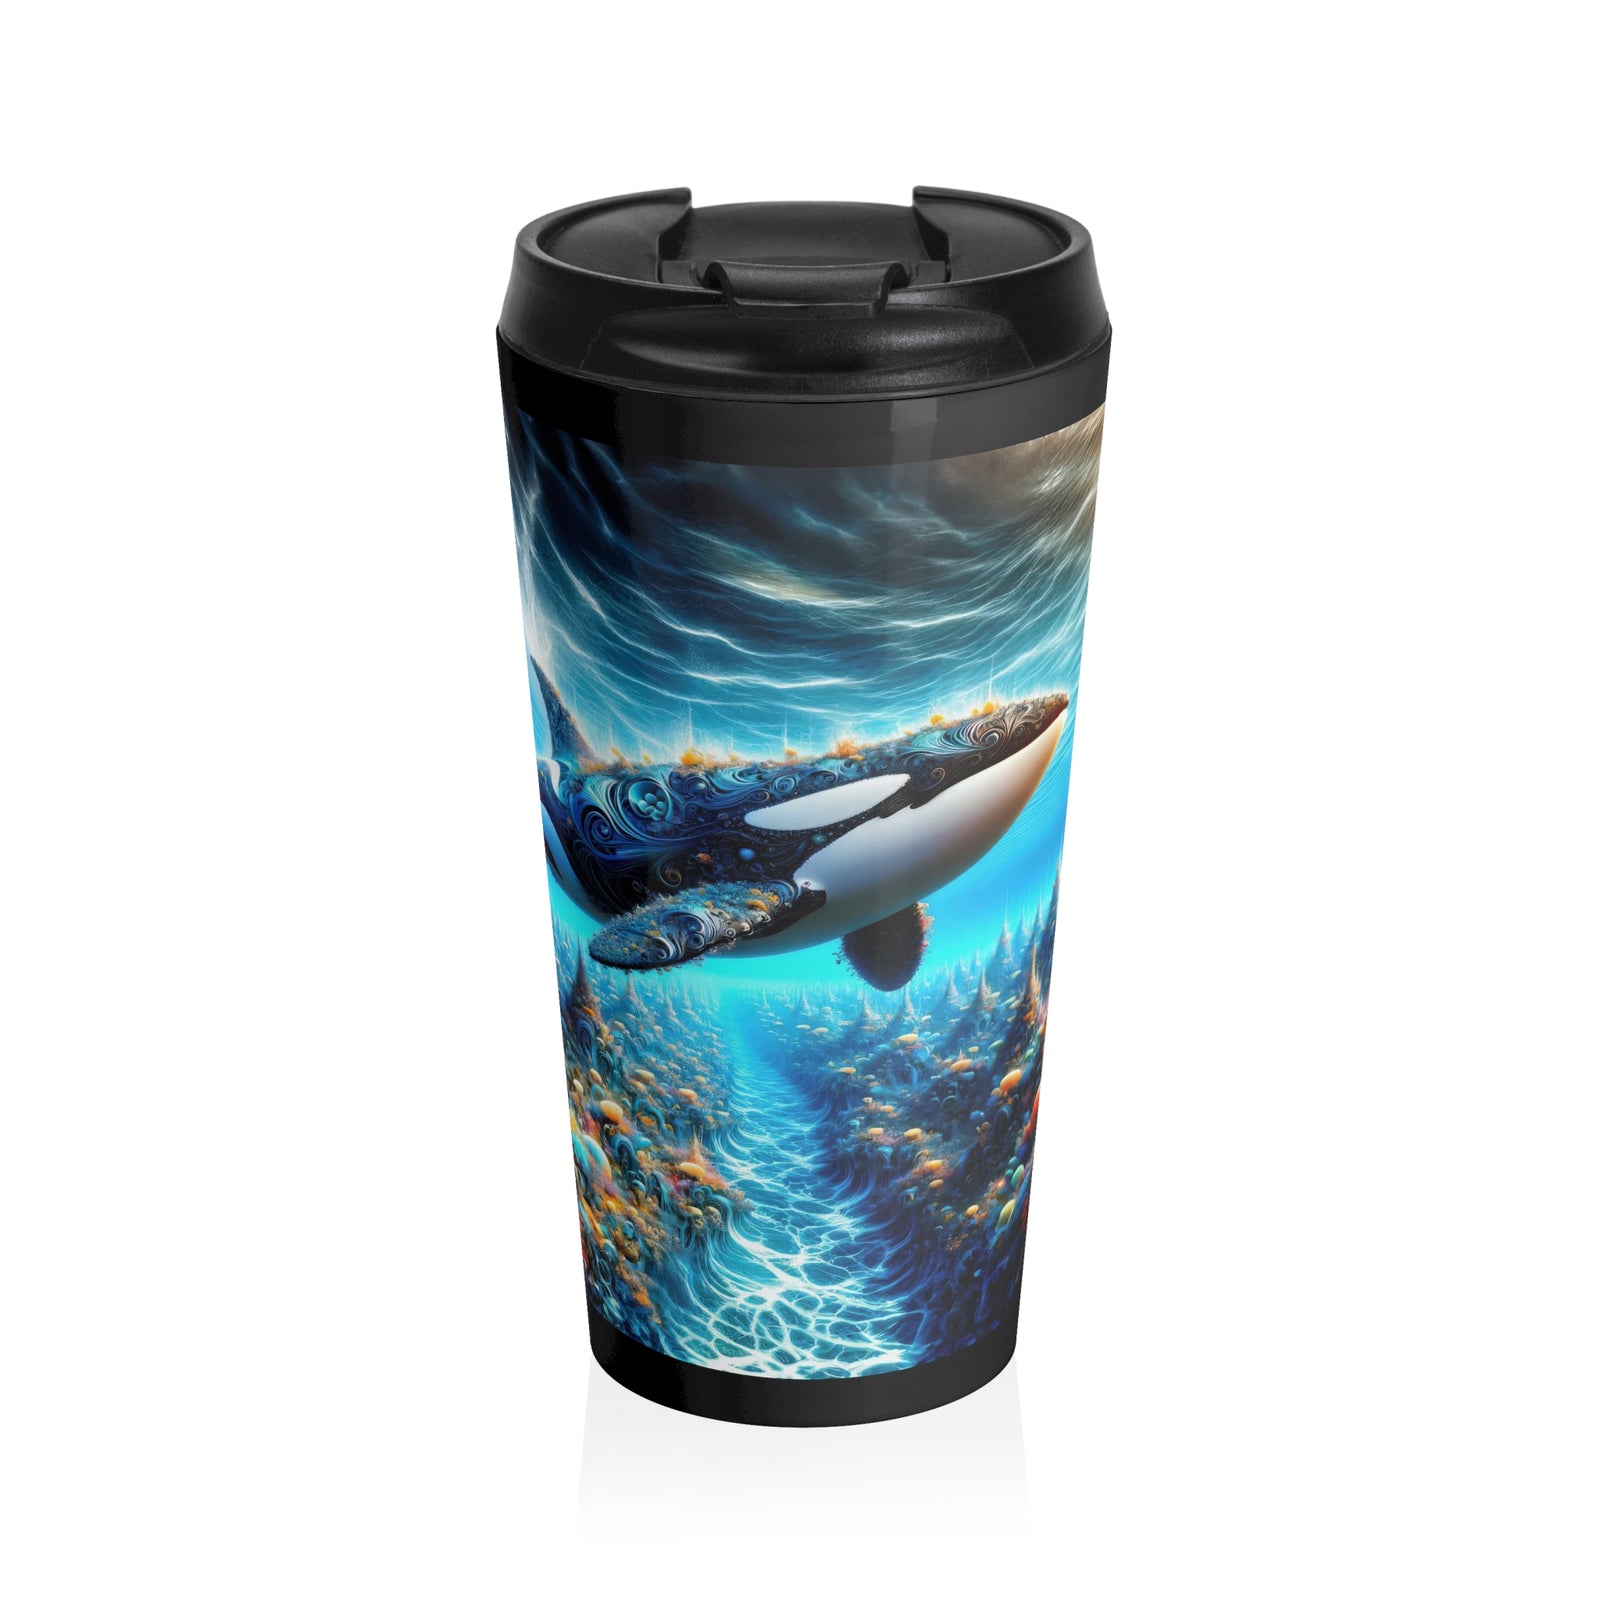 The Oracle of the Oceanic Opus Travel Mug